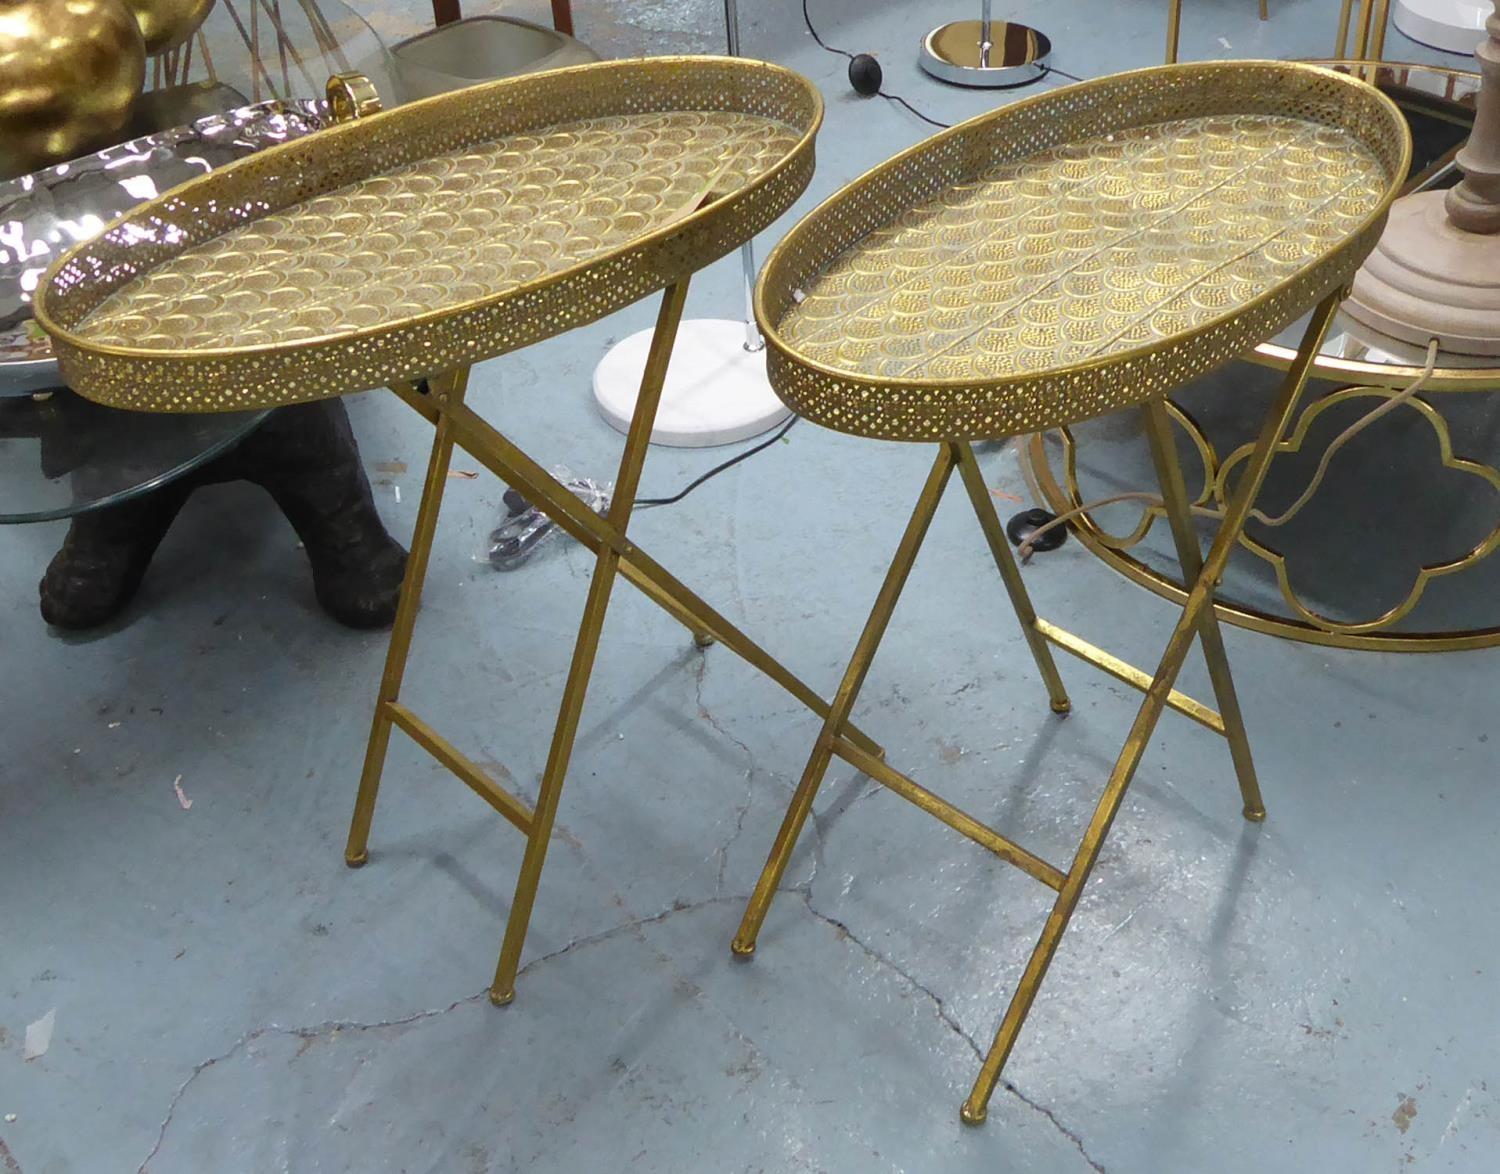 SIDE TABLES, a pair, gilt metal with feather pattern design, 64cm x 34cm x 68cm. (2)